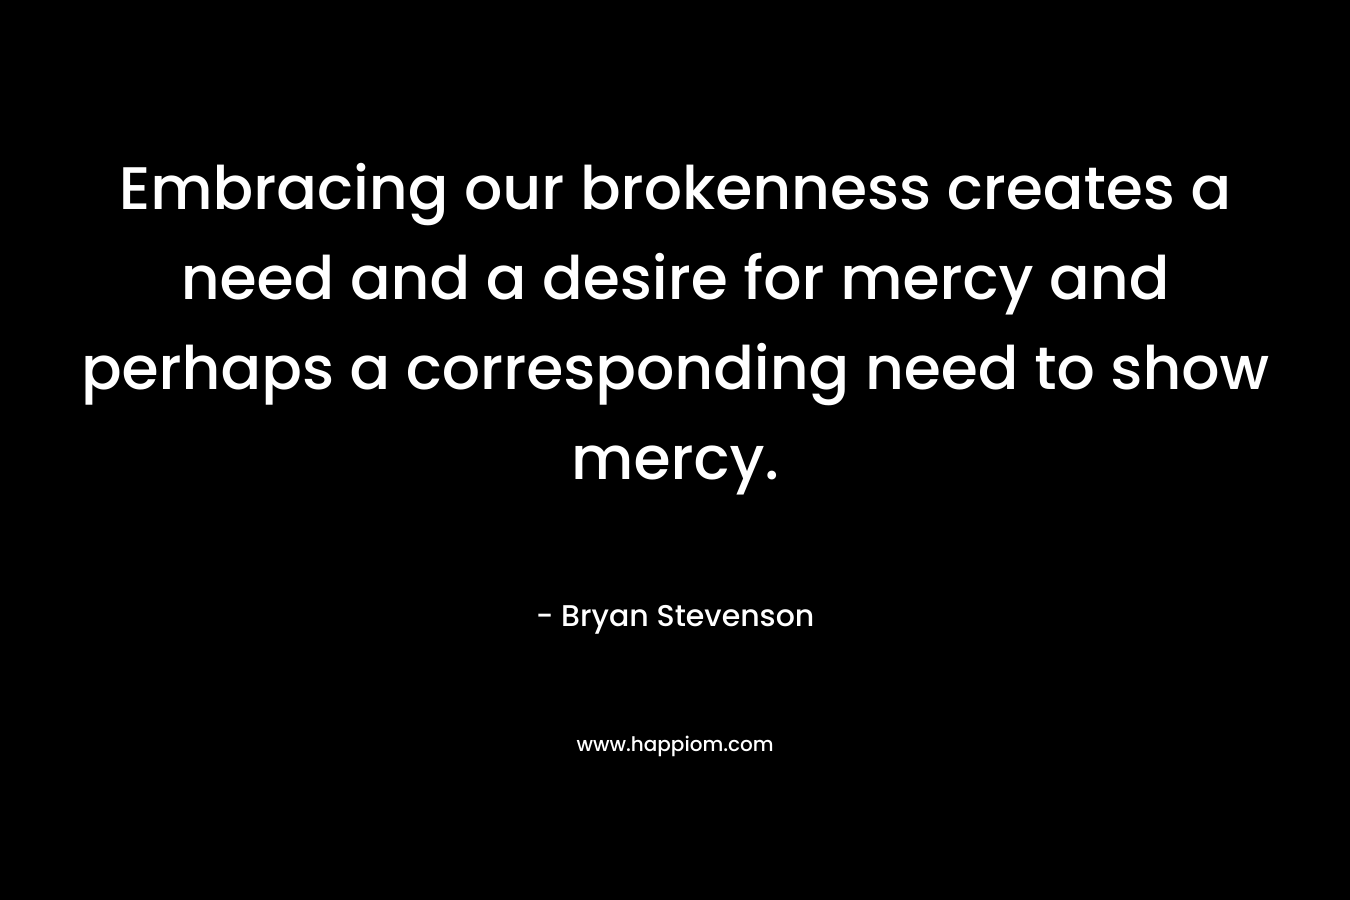 Embracing our brokenness creates a need and a desire for mercy and perhaps a corresponding need to show mercy.